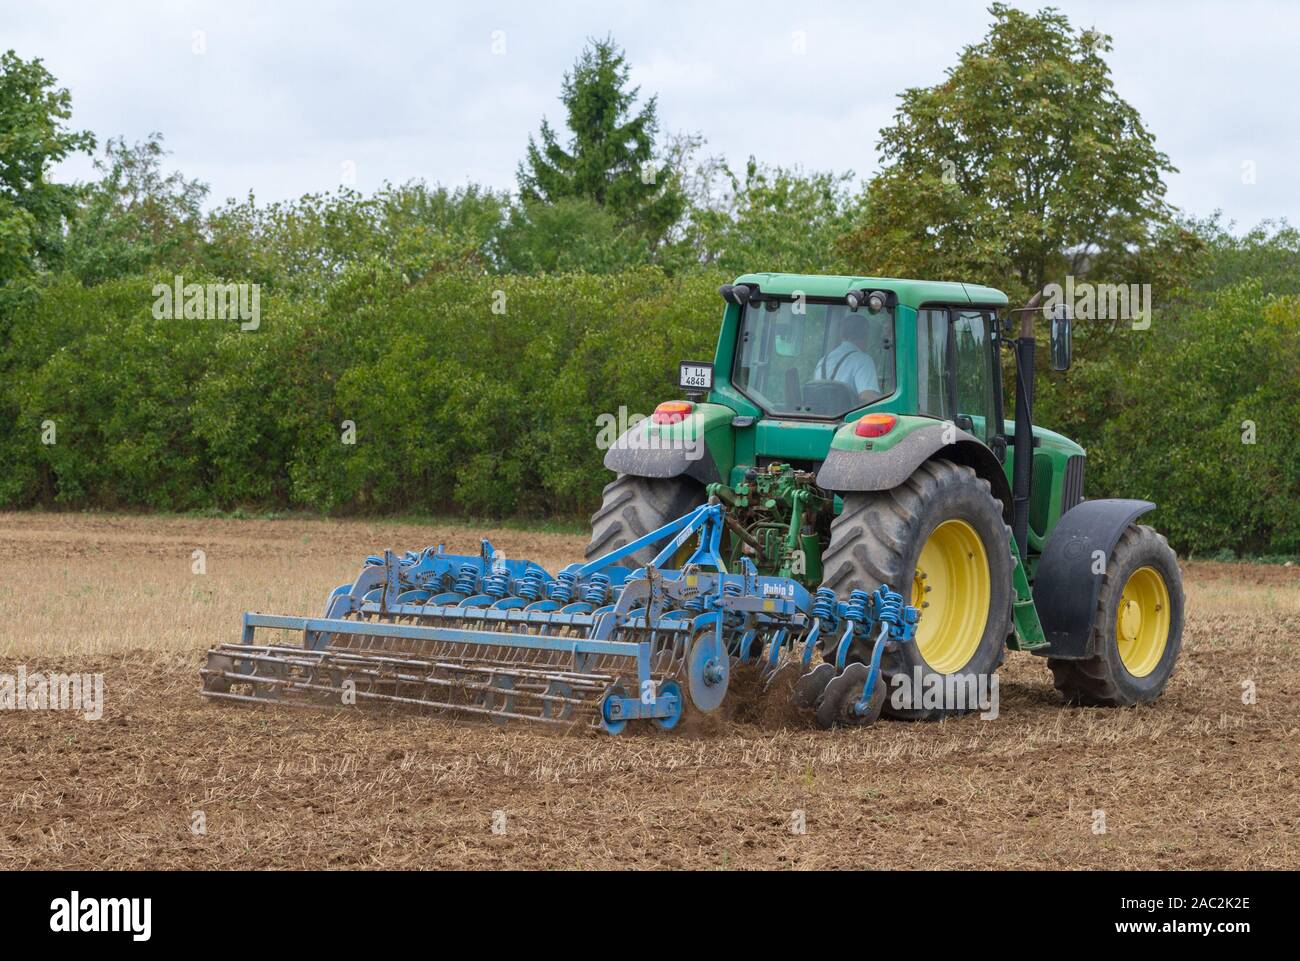 LATVIA, TUKUMS - 26 AUGUST: Conventional deep plowing with metal disks on 26 August 2018, Tukums district, Latvia. Stock Photo